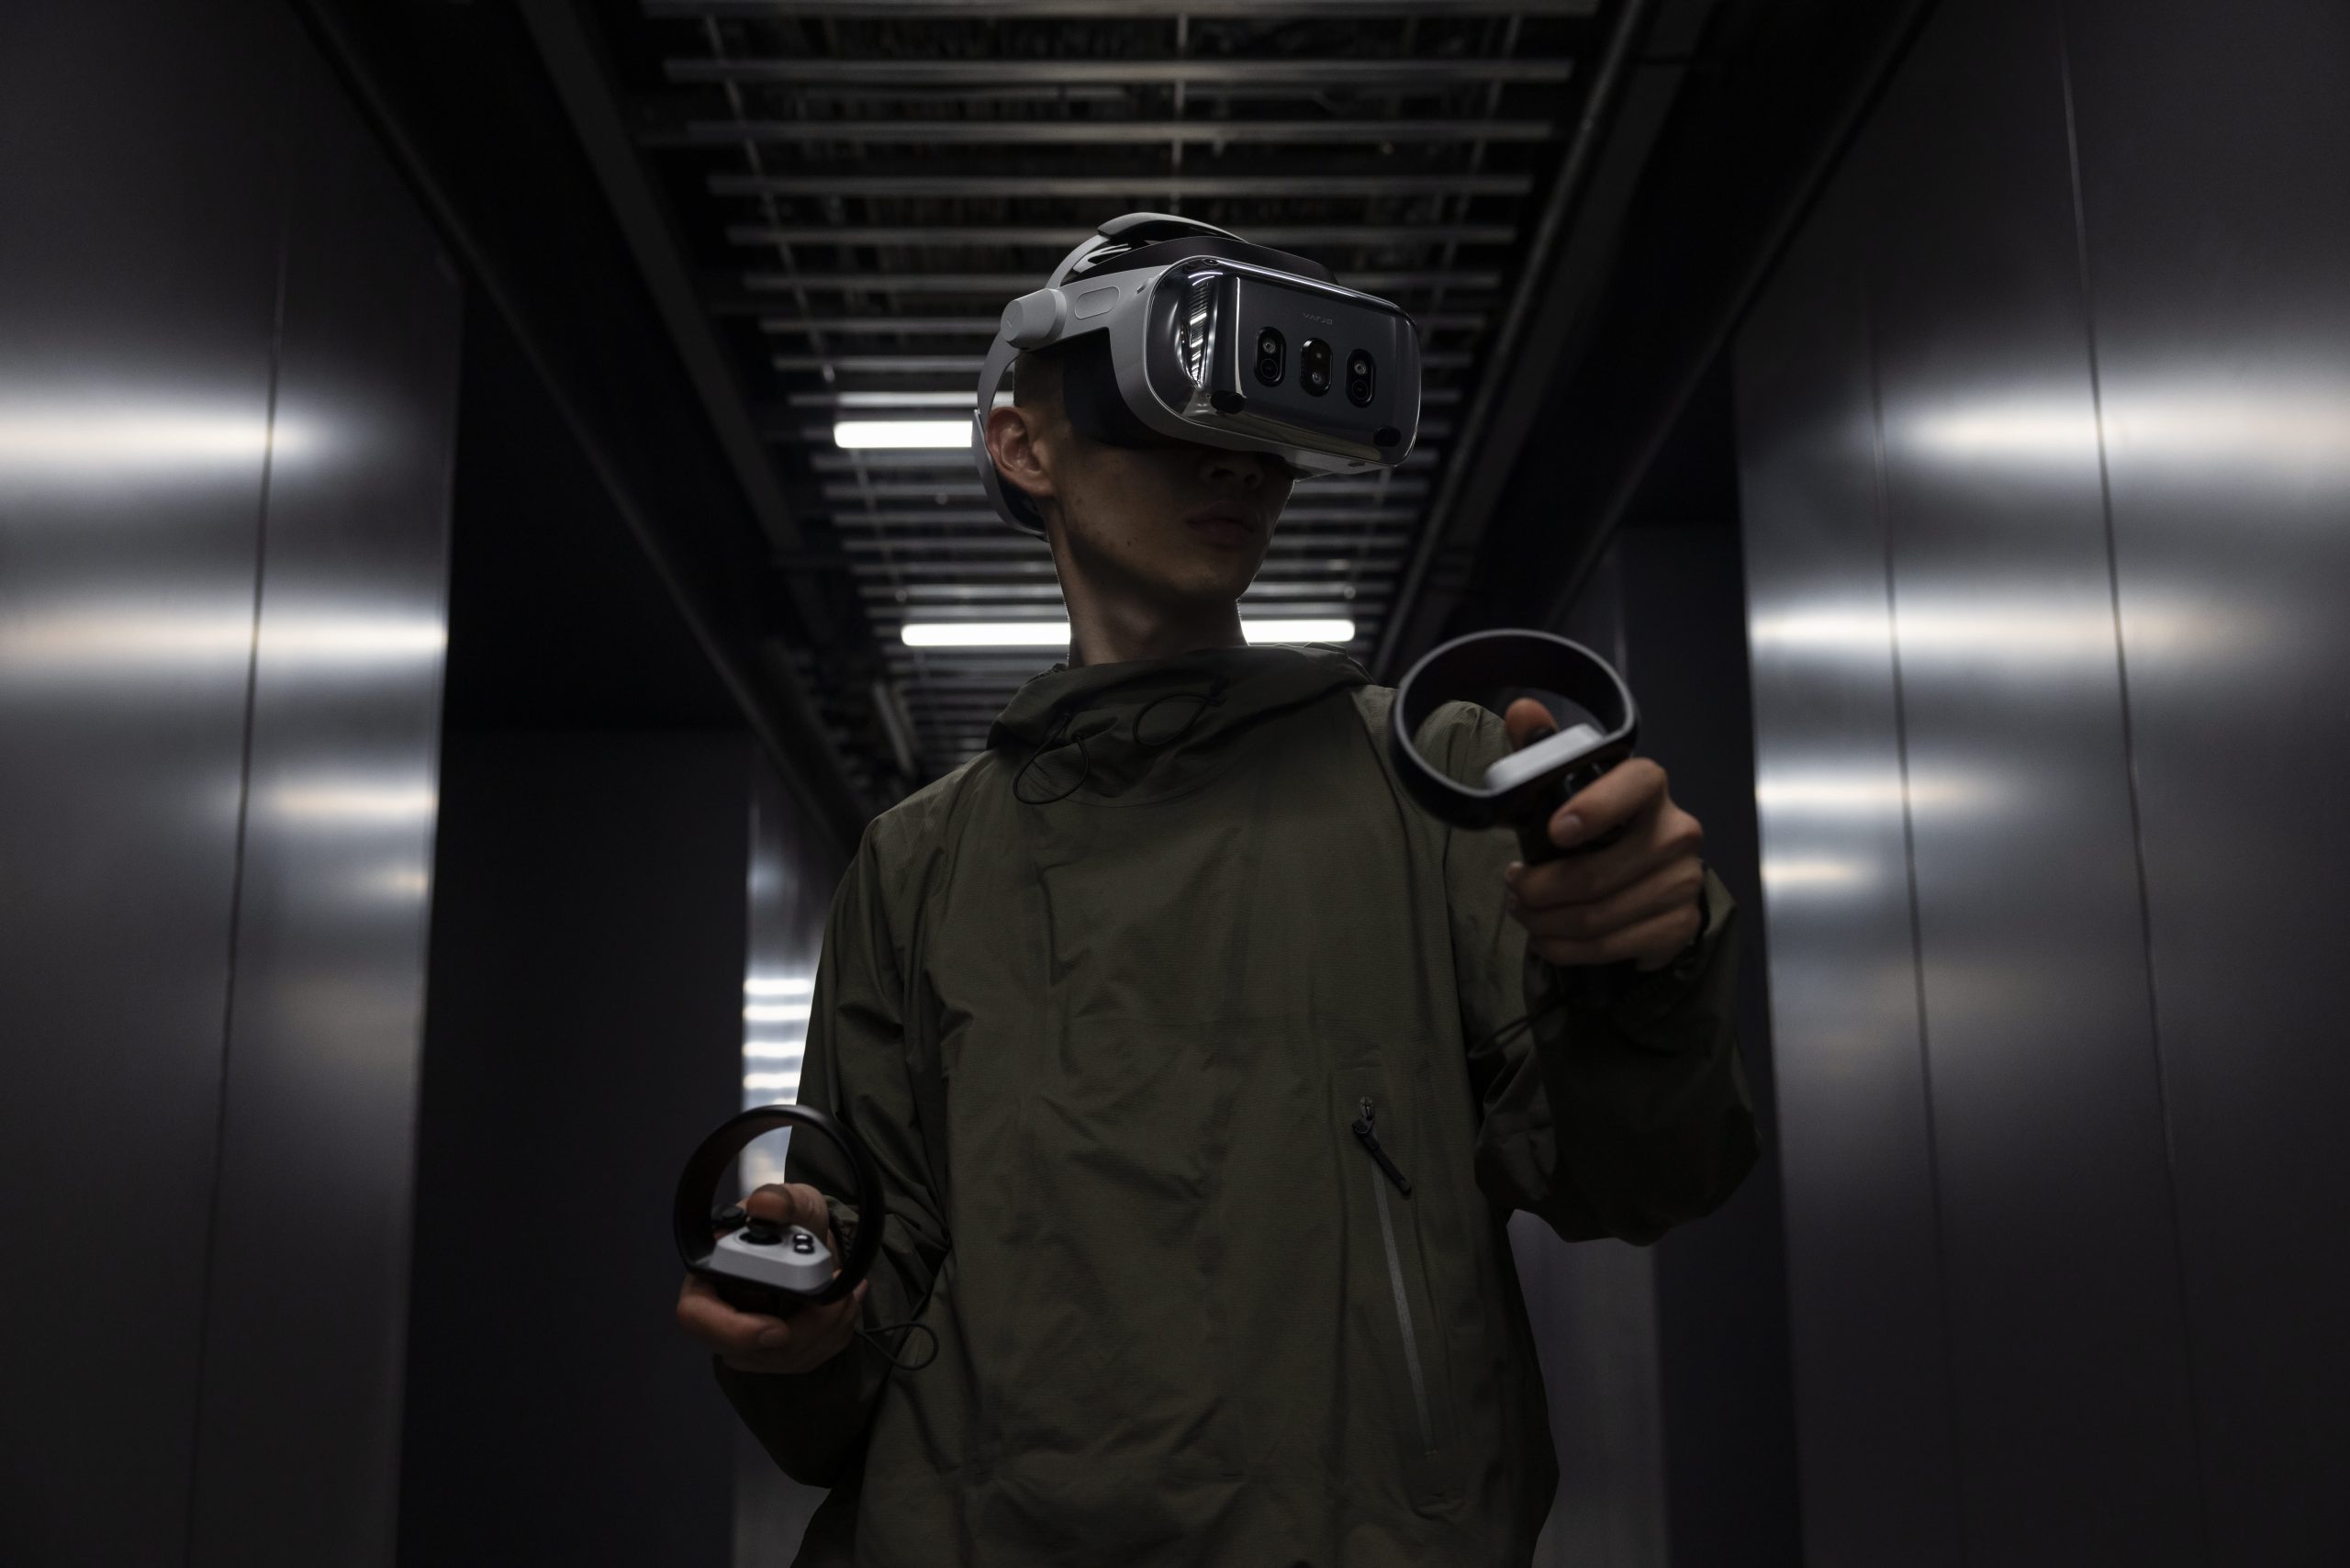 Finnish startup Varjo launches new $3,990 mixed reality headset to take on Apple, Microsoft